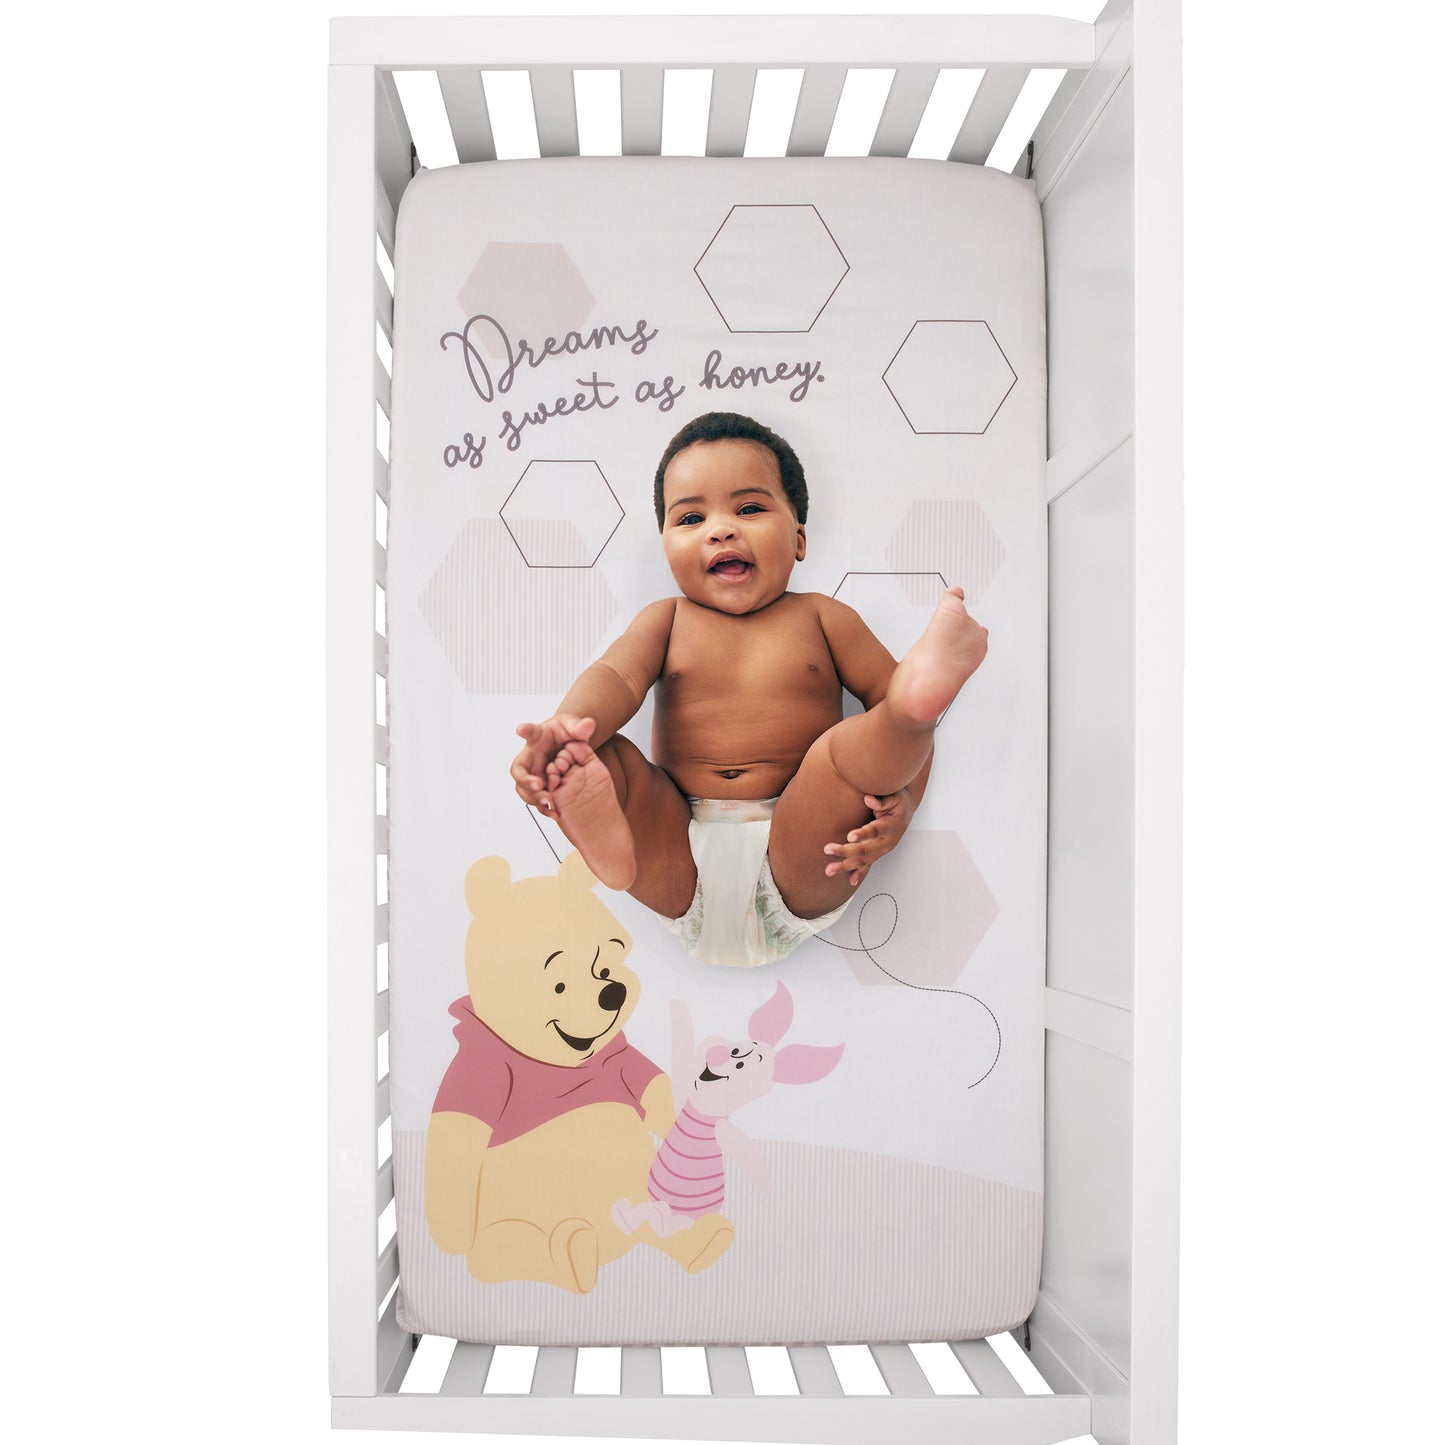 Disney Winnie the Pooh Hugs and Honeycombs Grey and White "Dreams as Sweet as Honey" with Hexagons and Piglet 100% Cotton Photo Op Fitted Crib Sheet